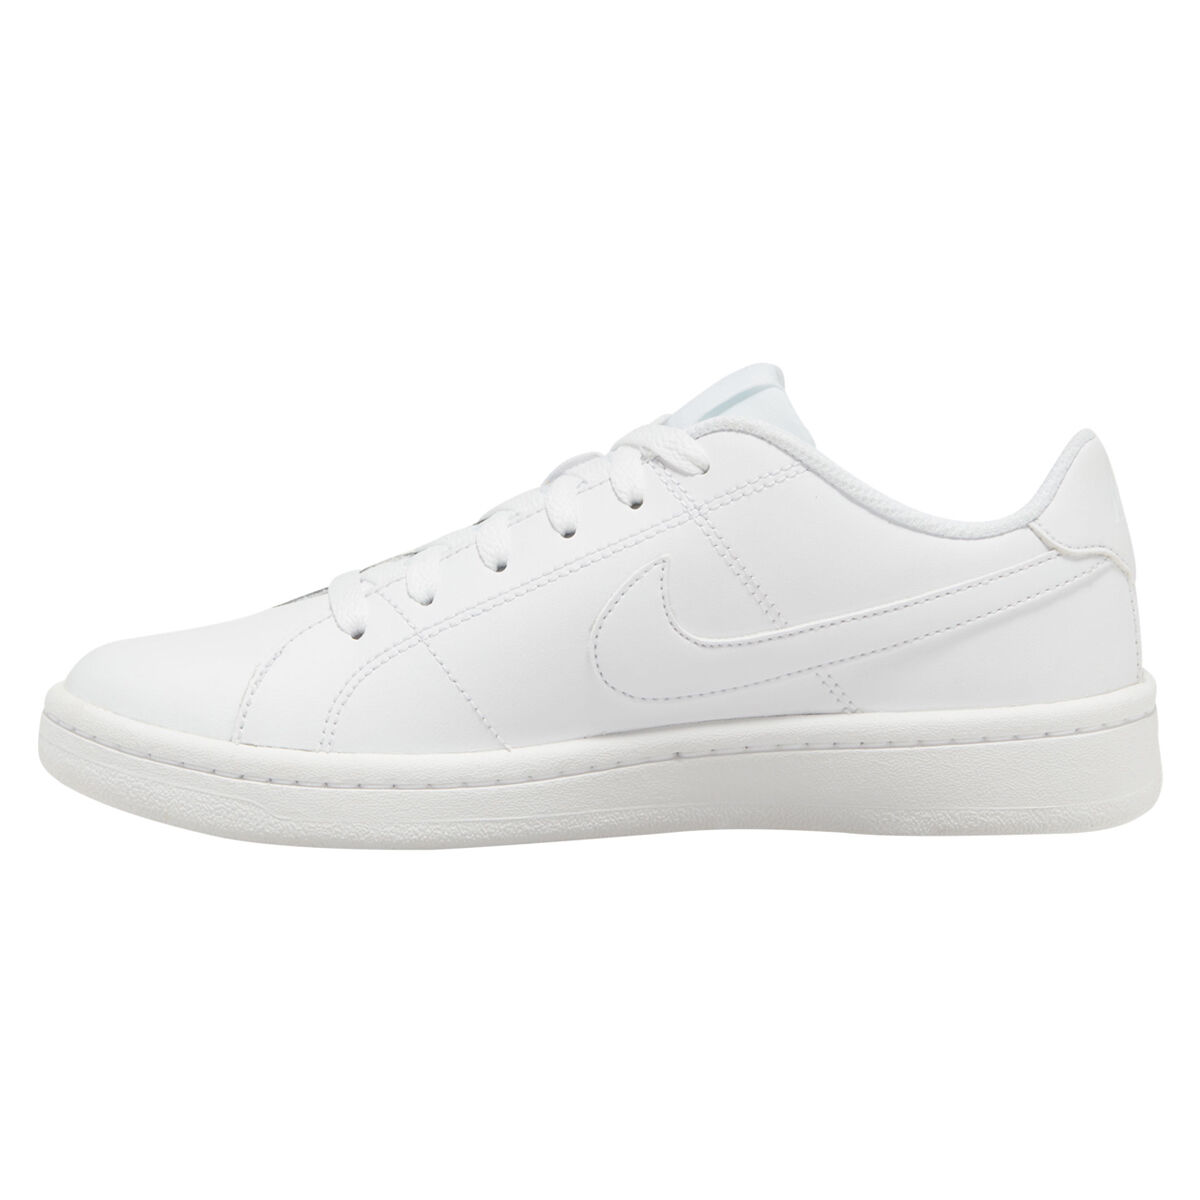 nike court royale classic